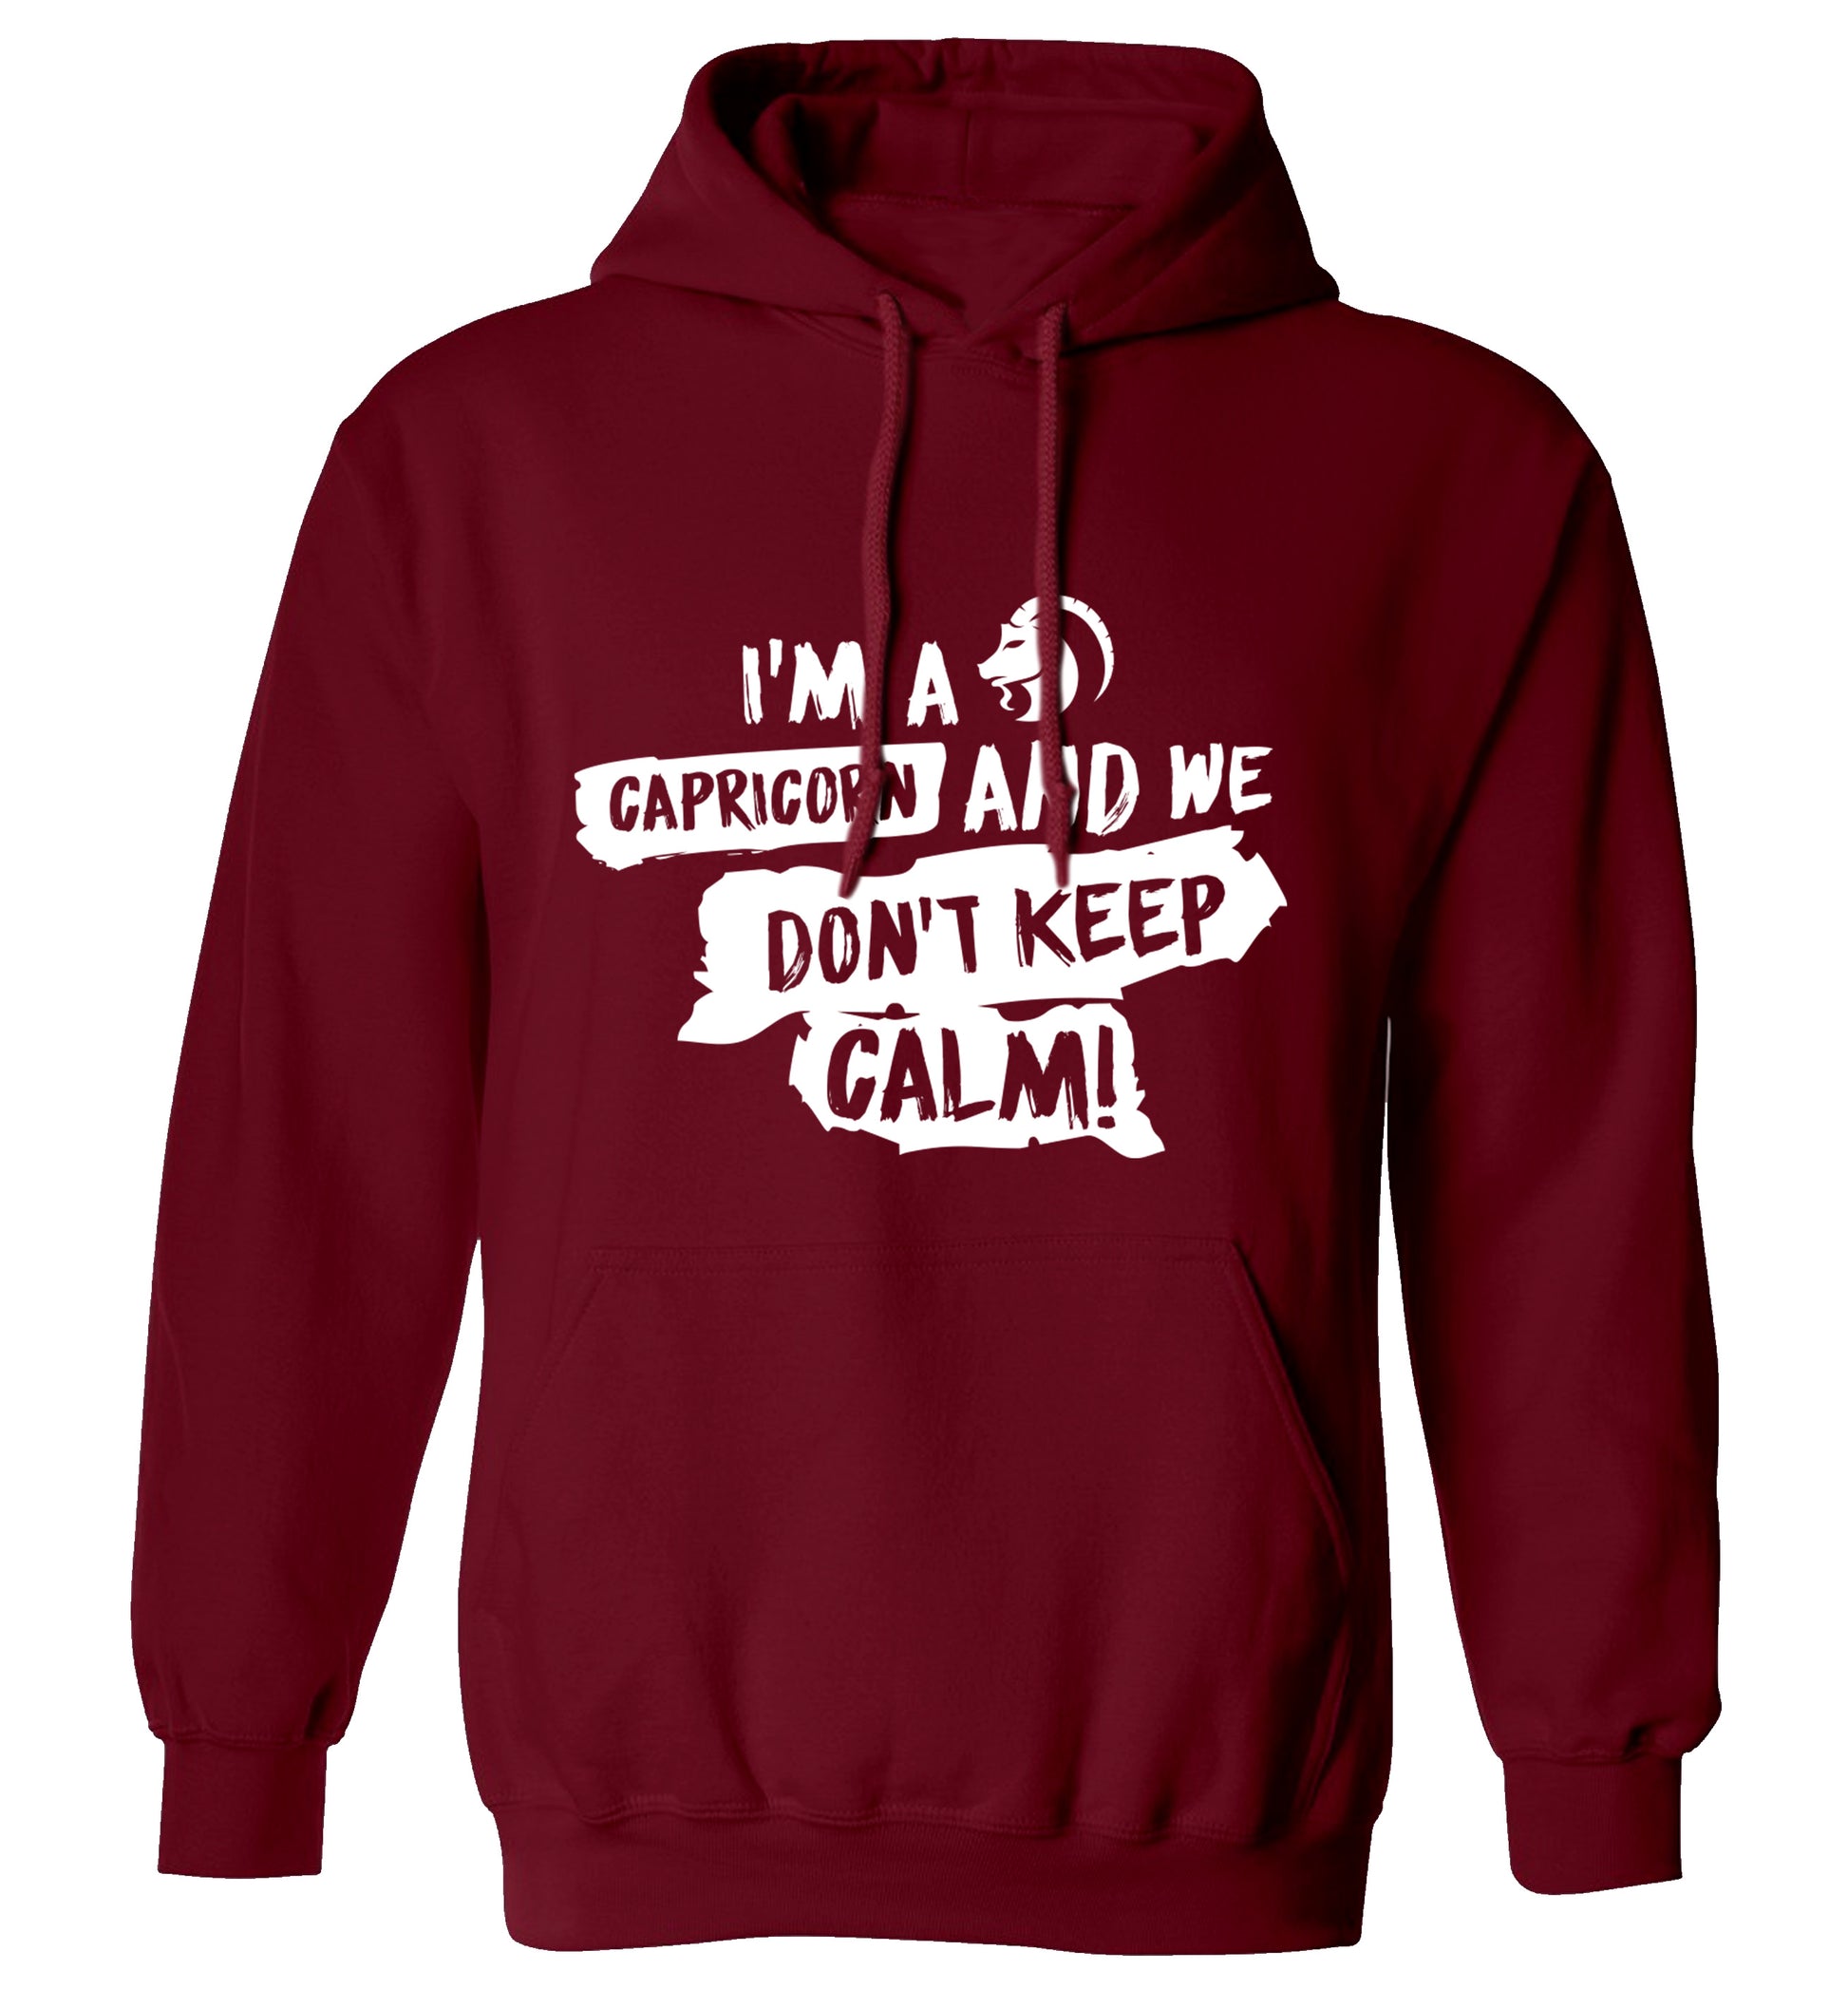 I'm a capricorn and we don't keep calm adults unisex maroon hoodie 2XL